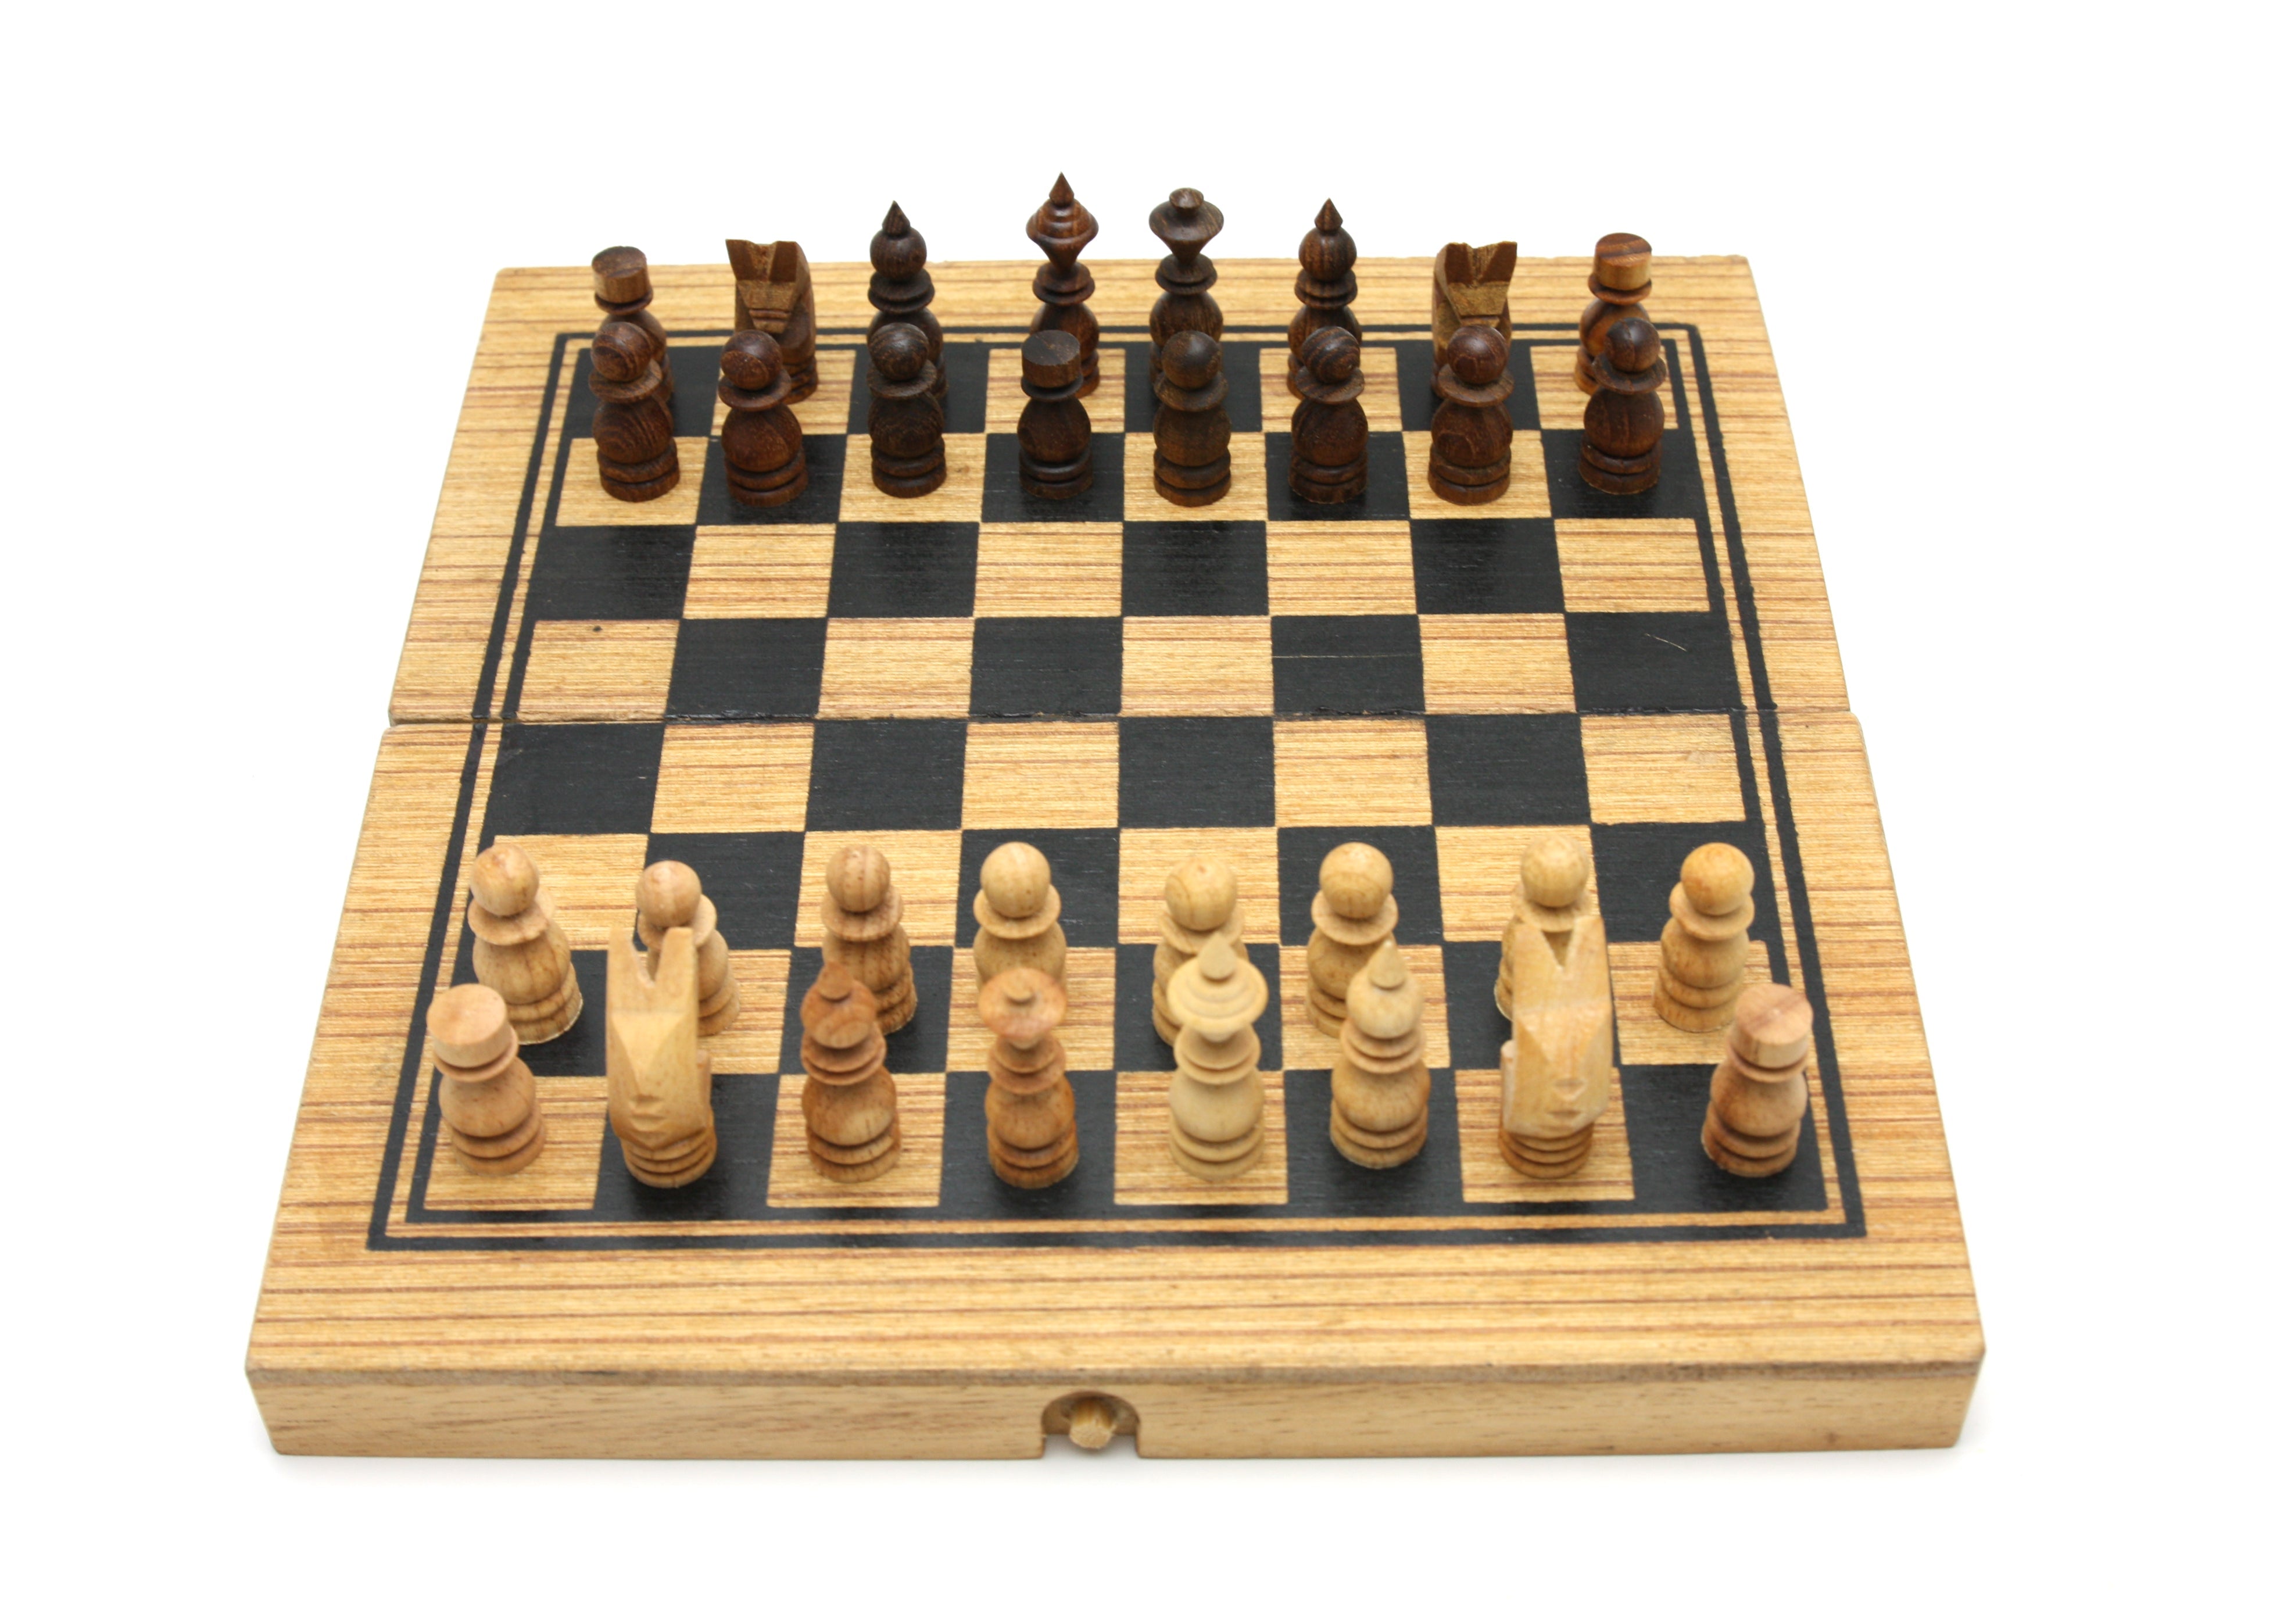 Clearance Sale Wooden Chess Set FREE BACKGAMMON PIECES 